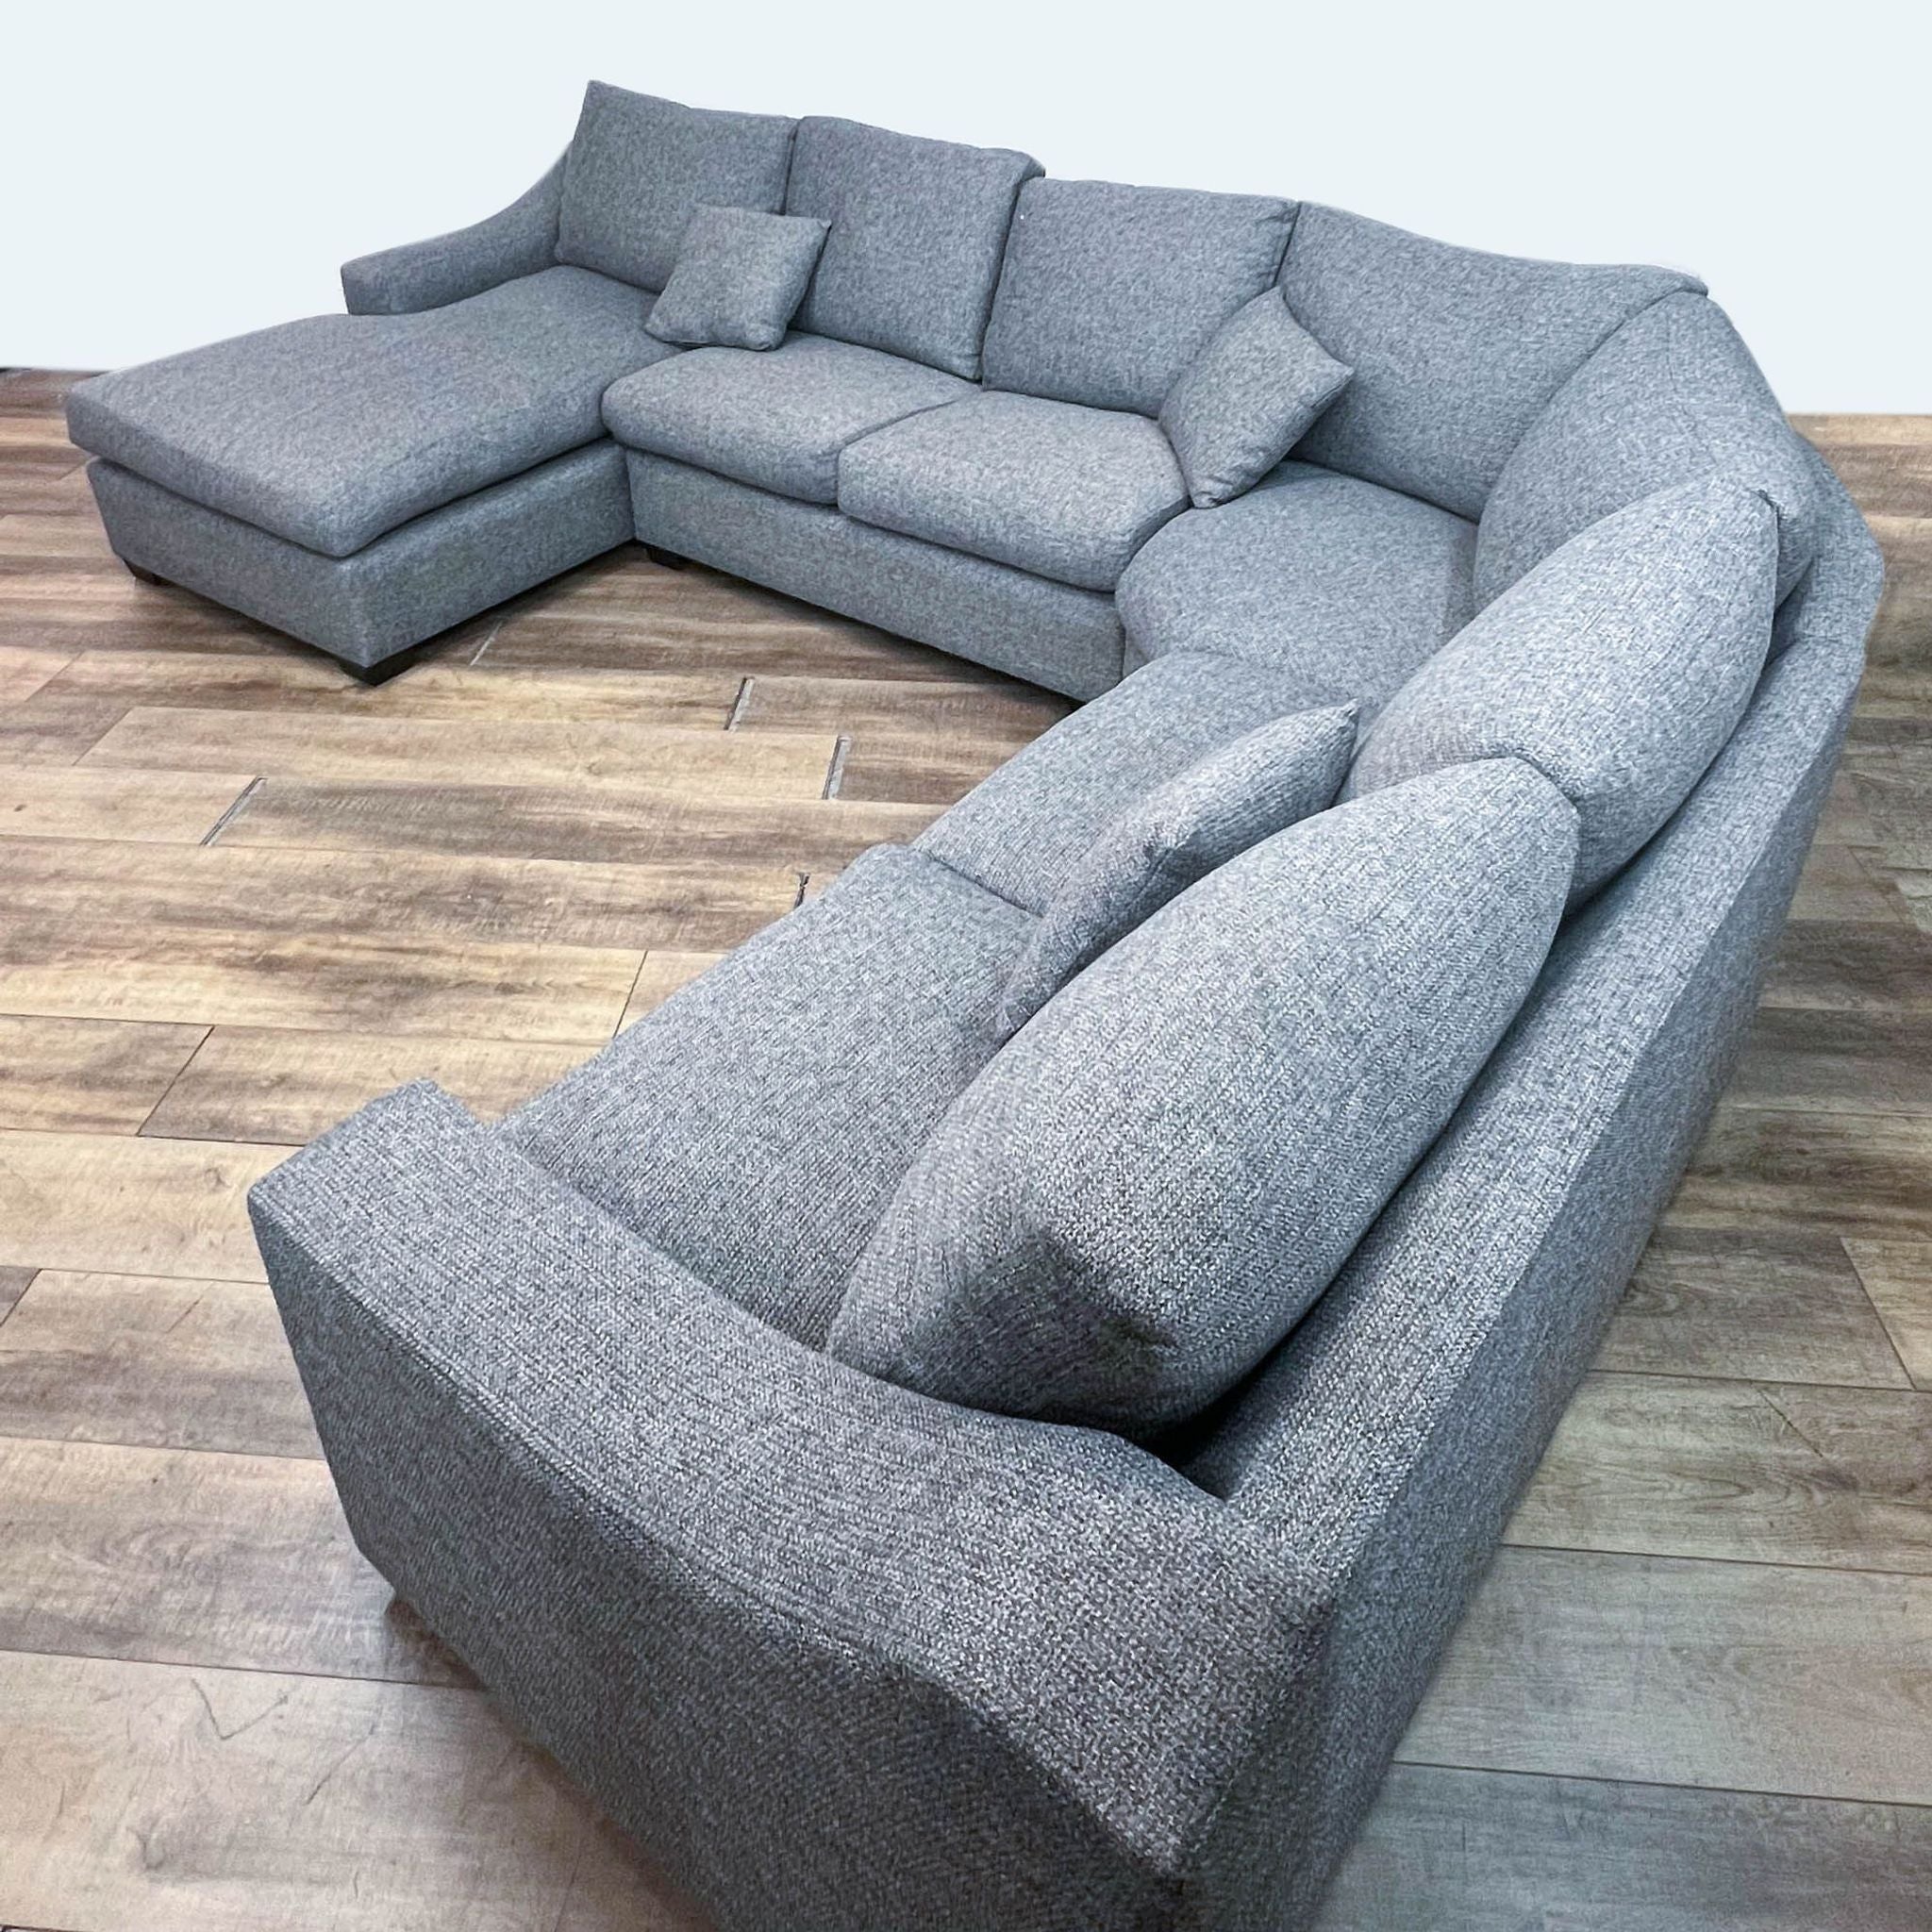 Gray Reperch sectional couch with plush cushions and dark base, displayed in a spacious setting.